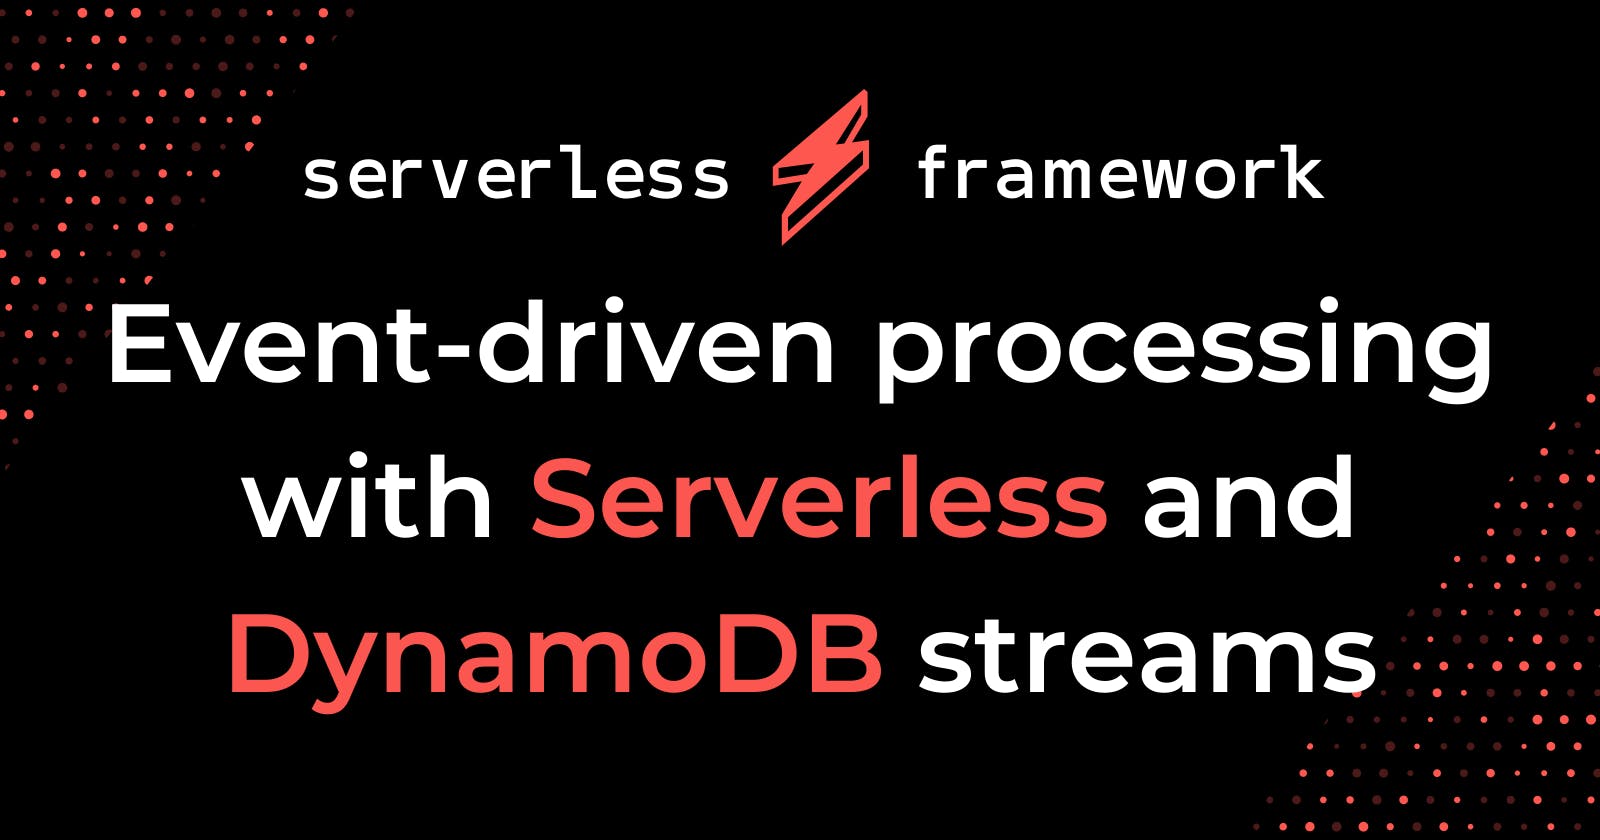 Event-driven processing with Serverless and DynamoDB streams